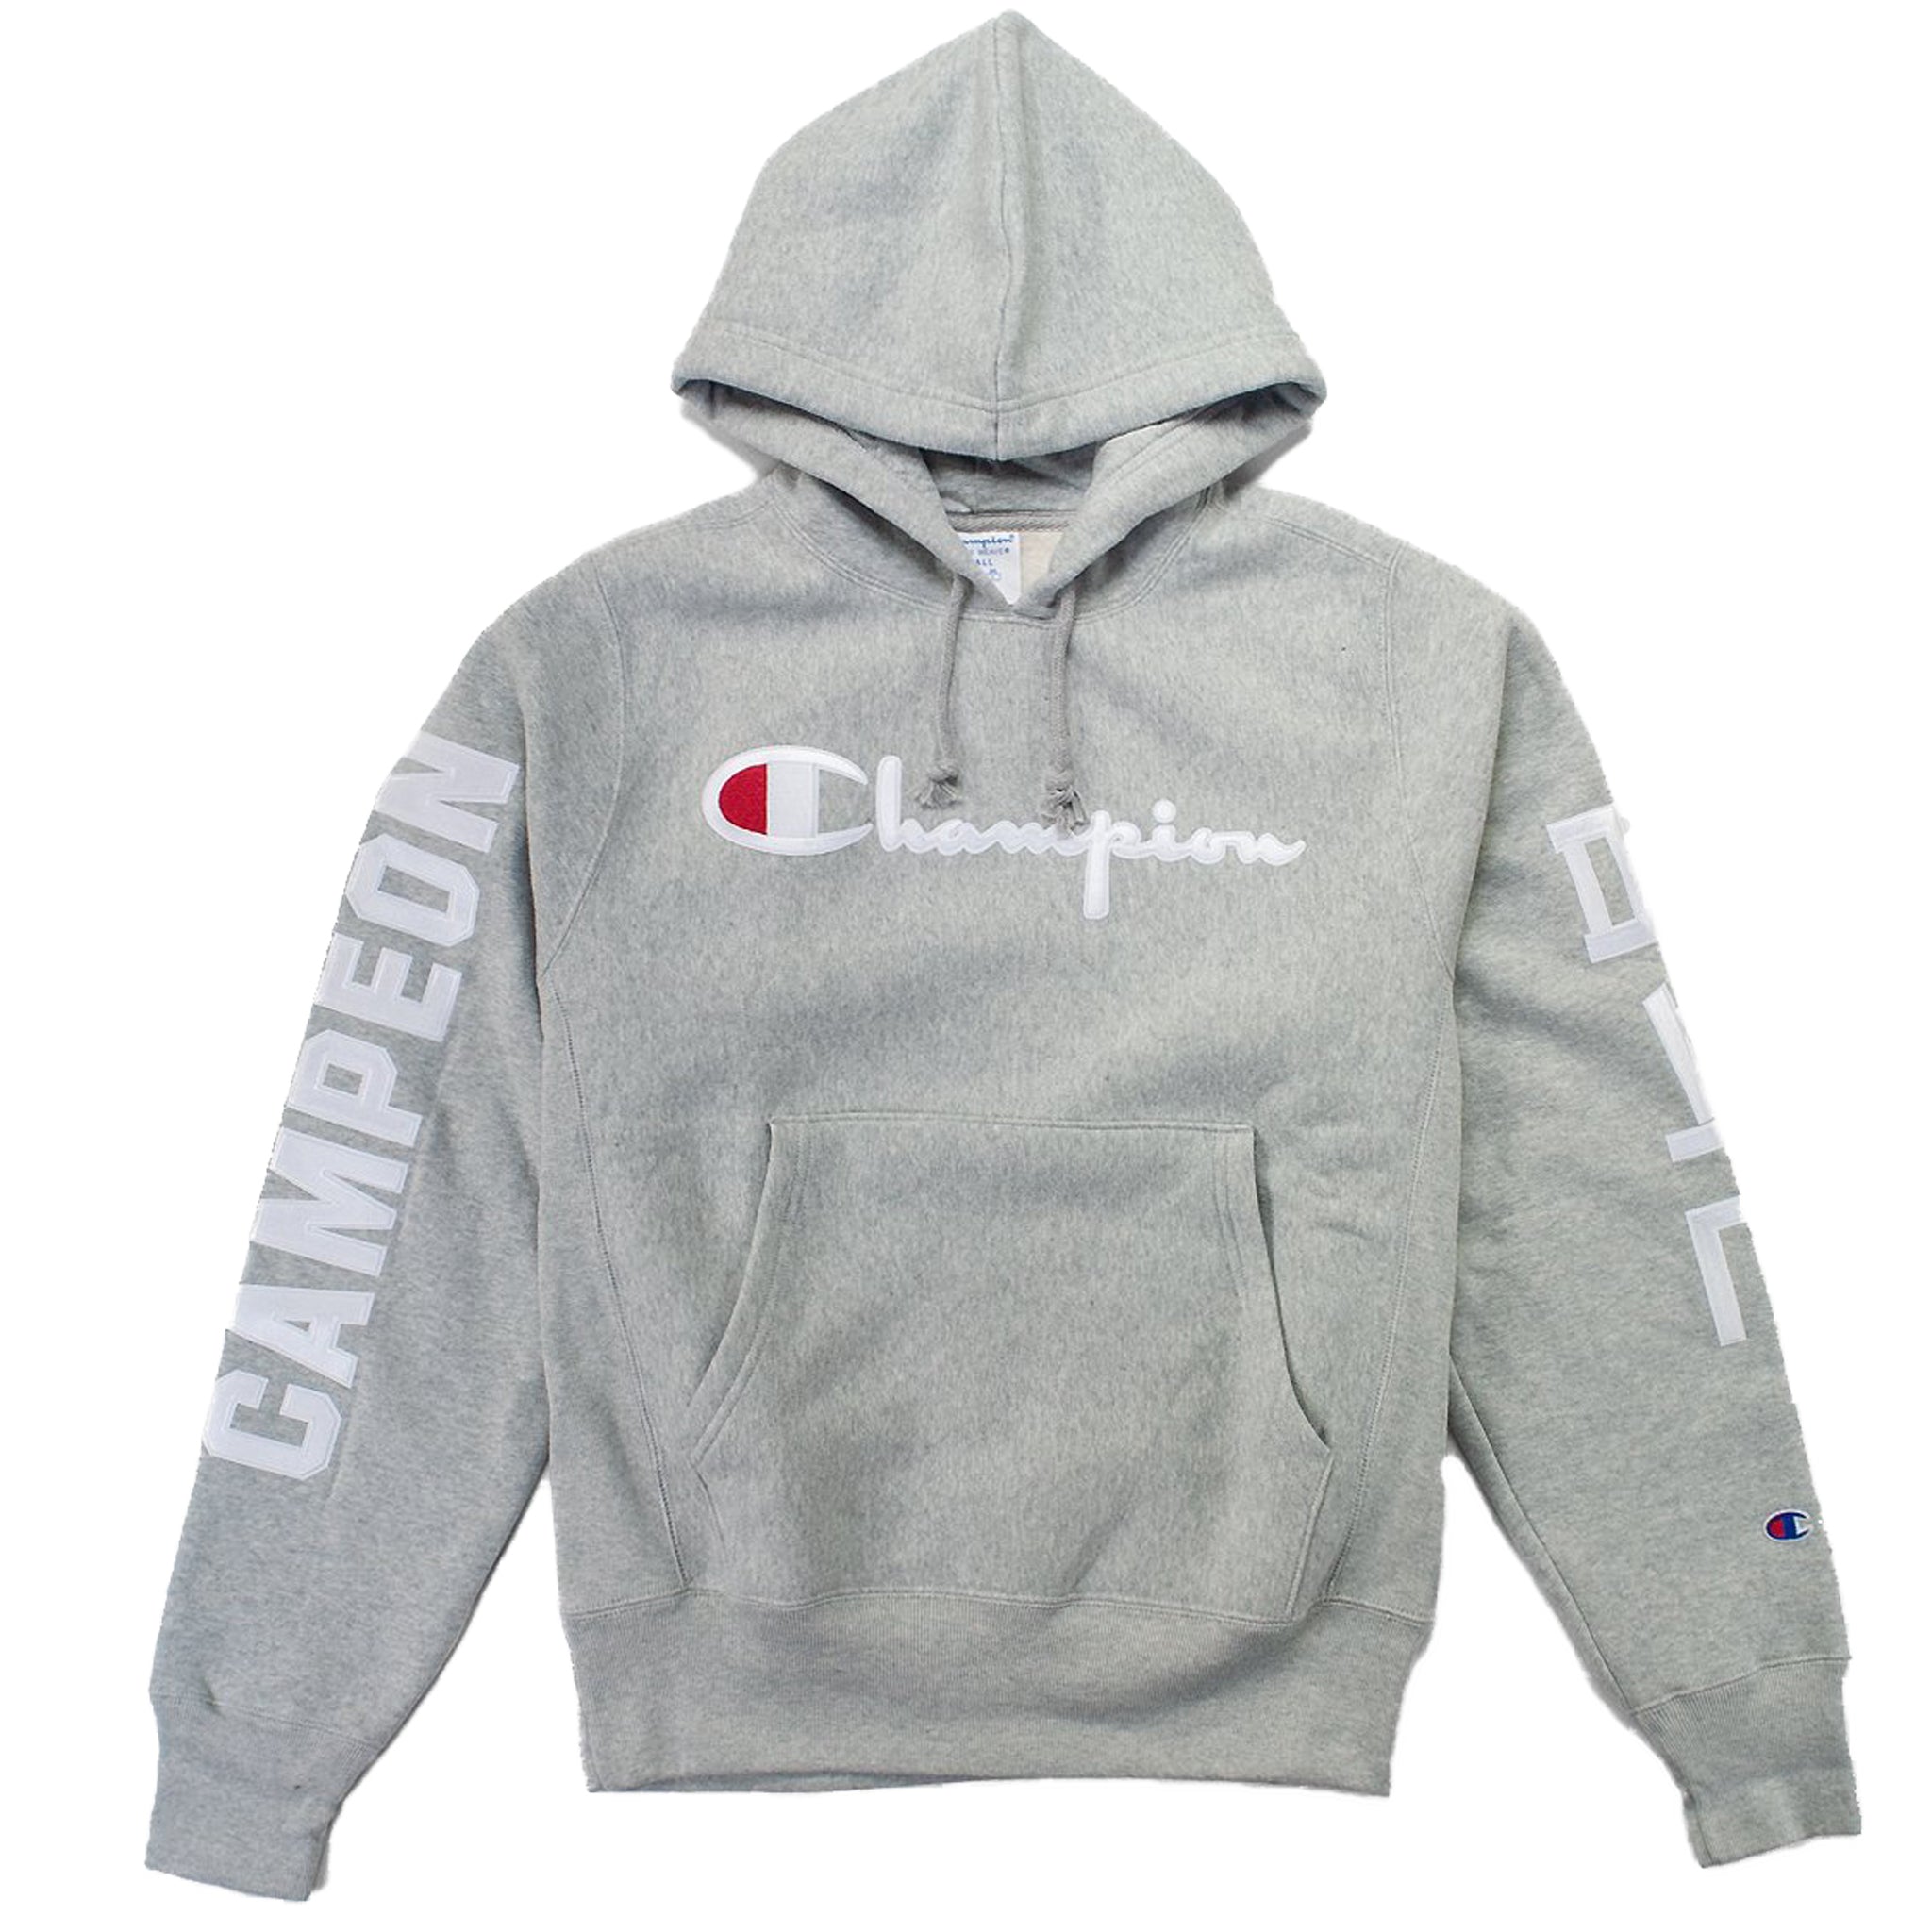 champion campeon hoodie off 53% - www 